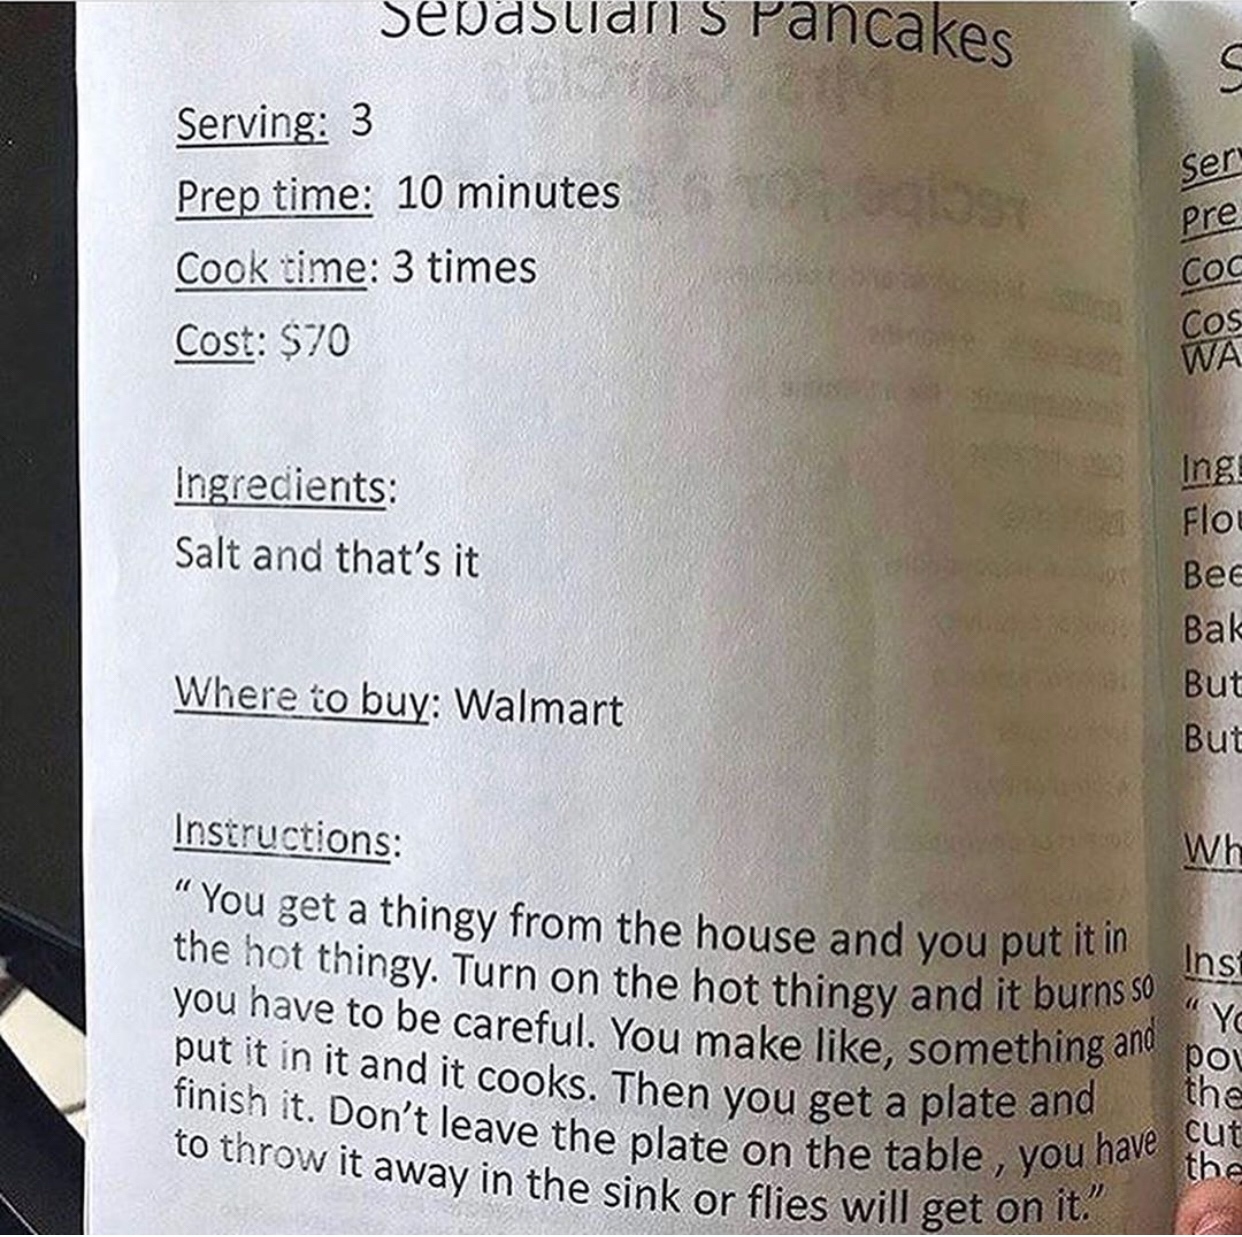 pre k class cookbook - Sepasuan s Pancakes Serving 3 Prep time 10 minutes ios Cook time 3 times Cost $70 ser pre Ingredients Salt and that's it Inge Flot Bee Bak But But Where to buy Walmart Wh Instructions "You get a thingy from the house and you put the